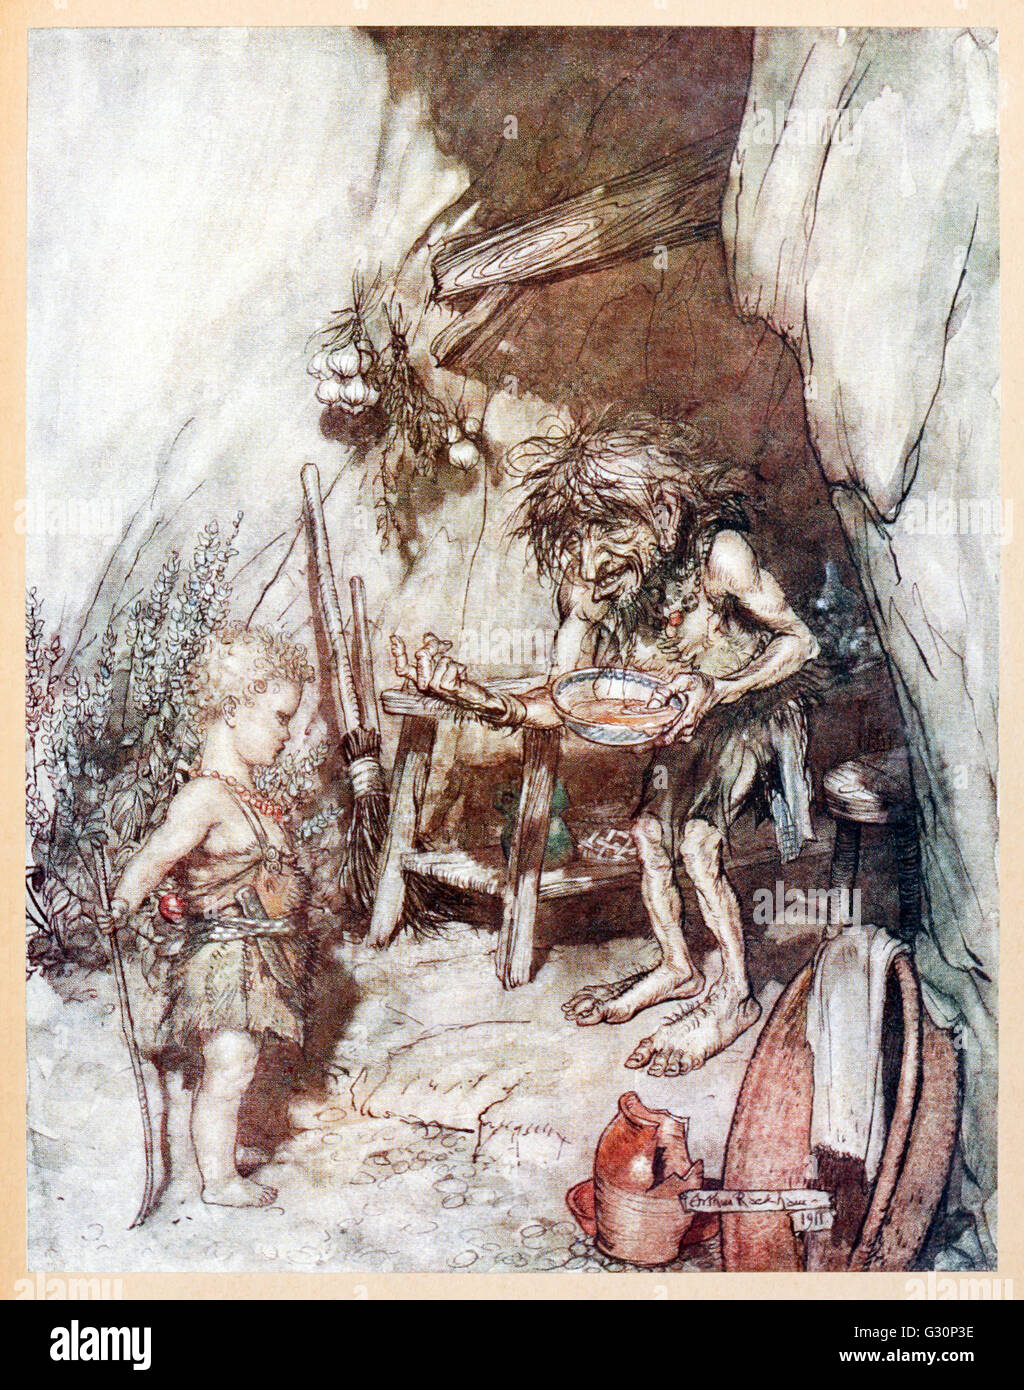 “Mime and the infant Siegfried” from 'Siegfried & The Twilight of the Gods' illustrated by Arthur Rackham (1867-1939). See description for more information. Stock Photo